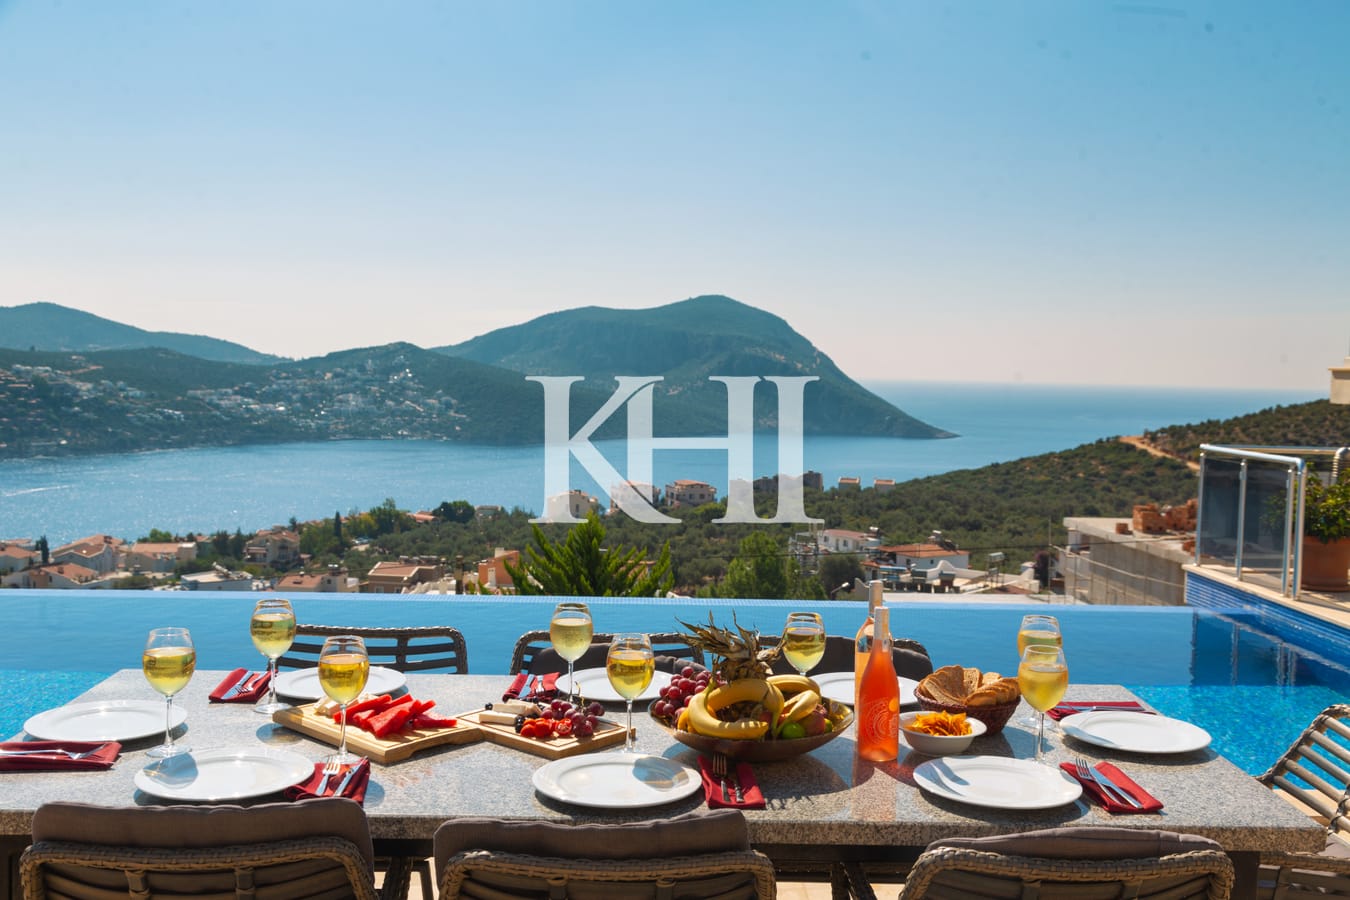 Detached Villa For Sale With Panoramic Kalkan View Slide Image 3